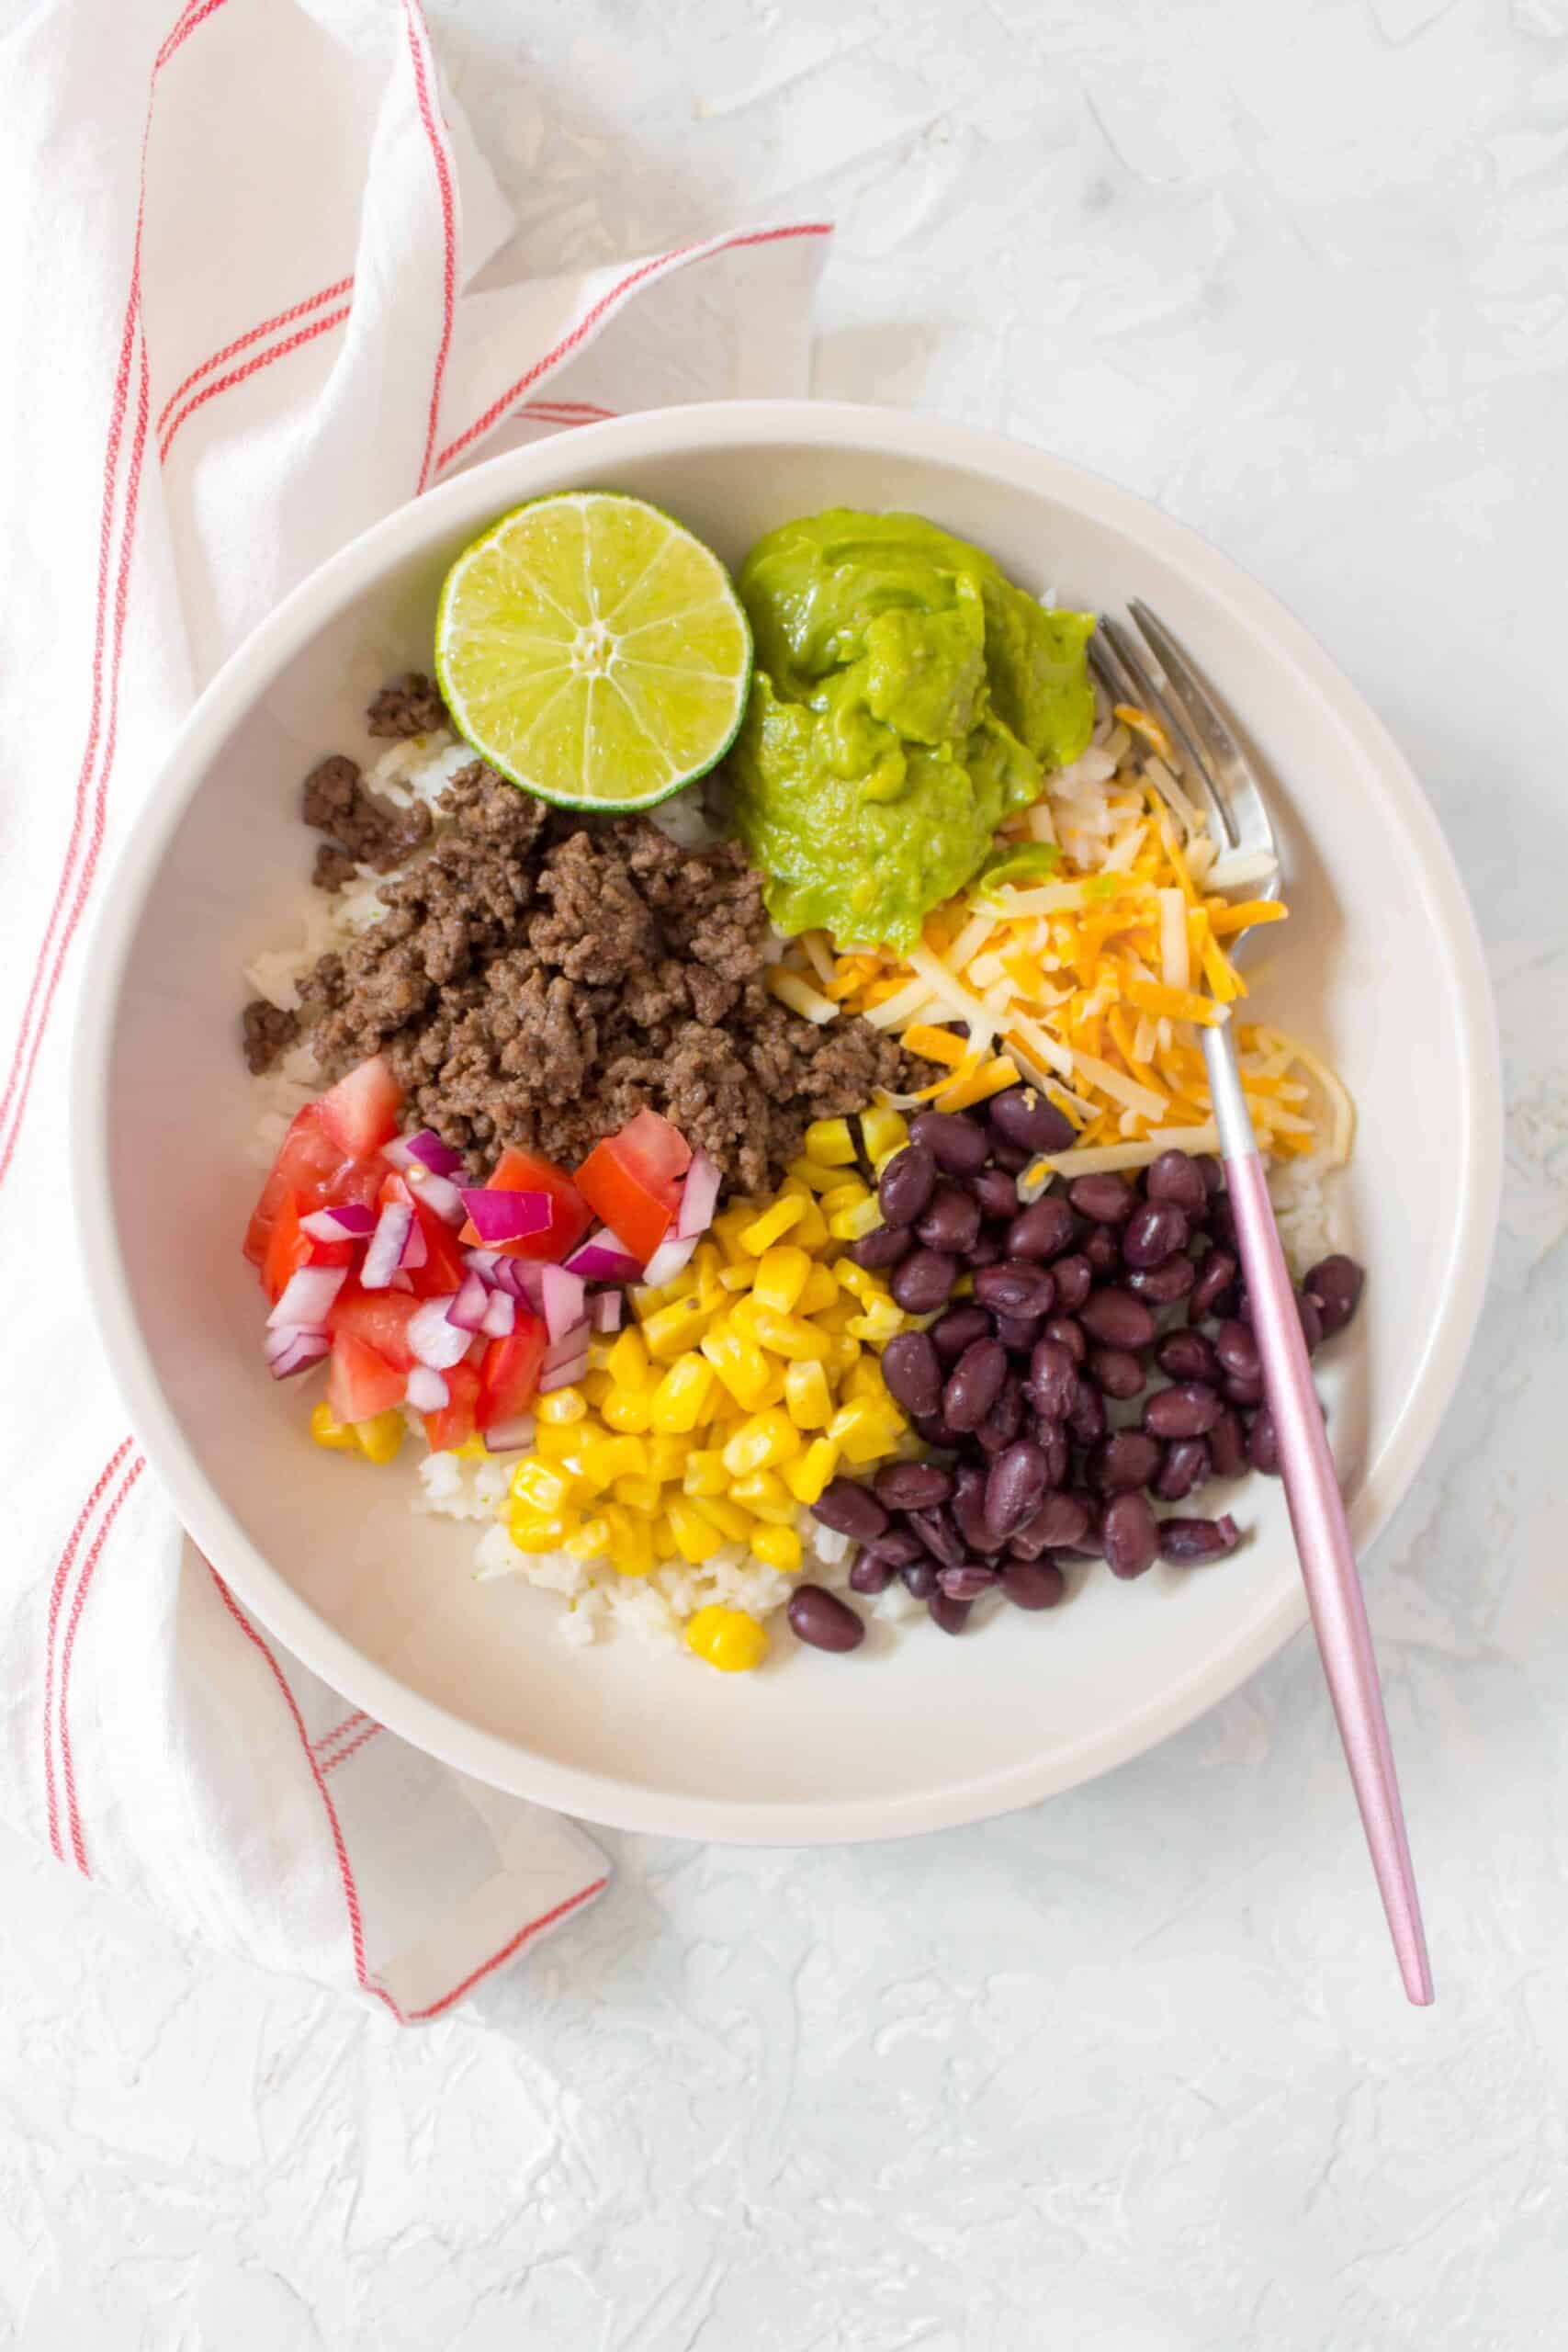 This easy and healthy Taco Bowl Meal Prep is going to become a staple in your meal prep rotation! Simple, filling, and delicious! 